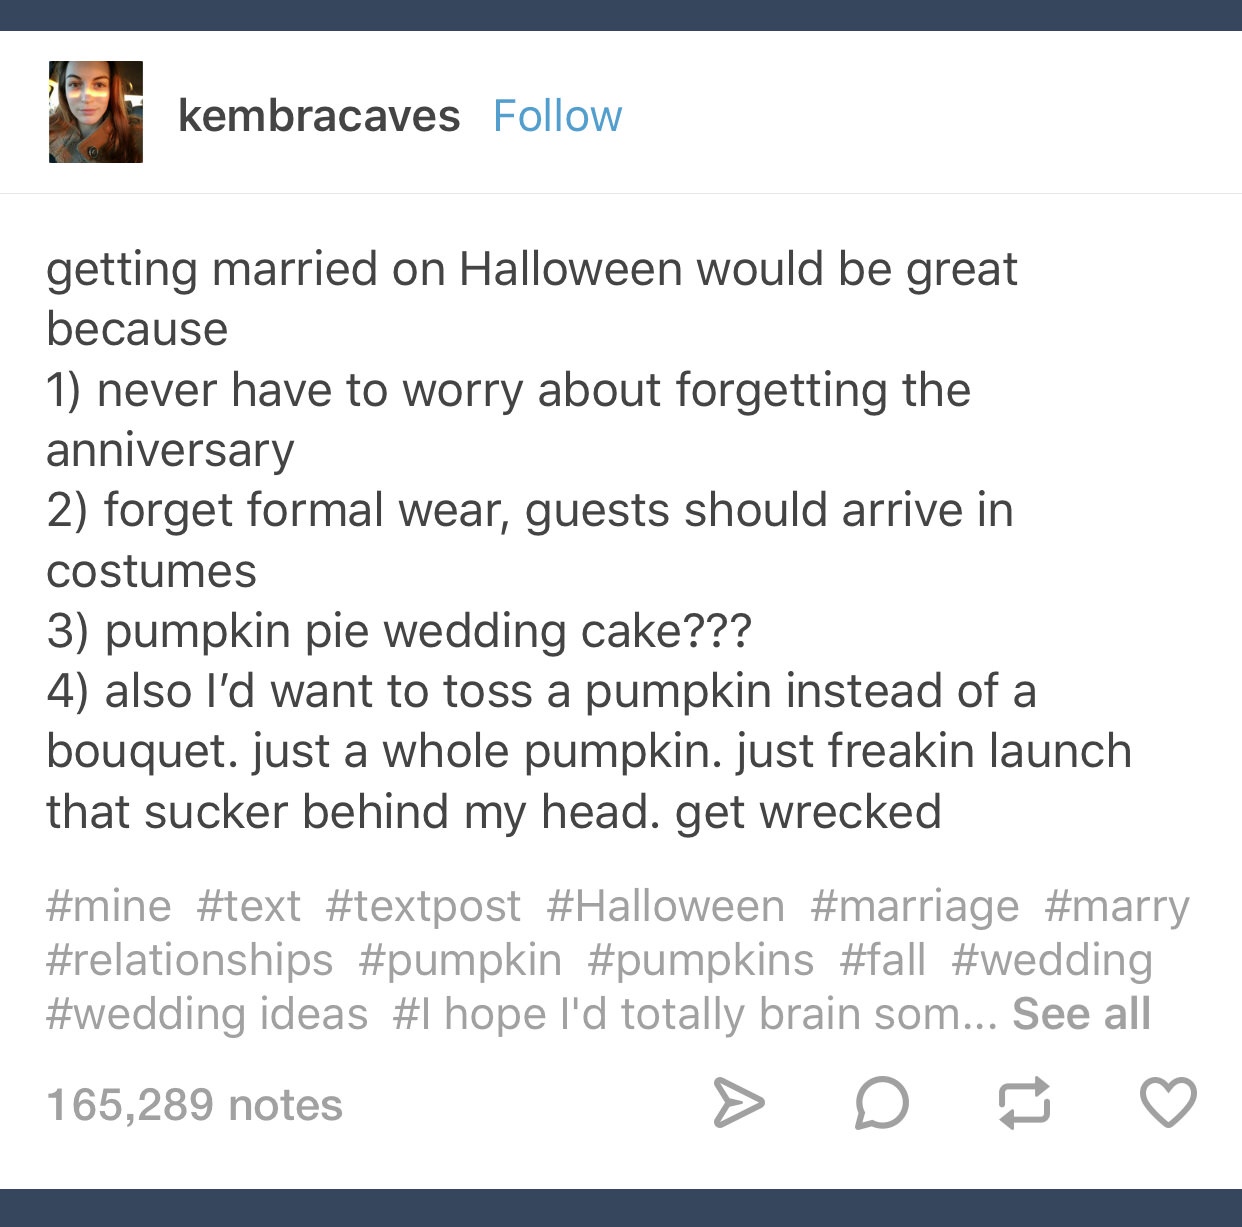 halloween text post - kembracaves getting married on Halloween would be great because 1 never have to worry about forgetting the anniversary 2 forget formal wear, guests should arrive in costumes 3 pumpkin pie wedding cake??? 4 also I'd want to toss a pum